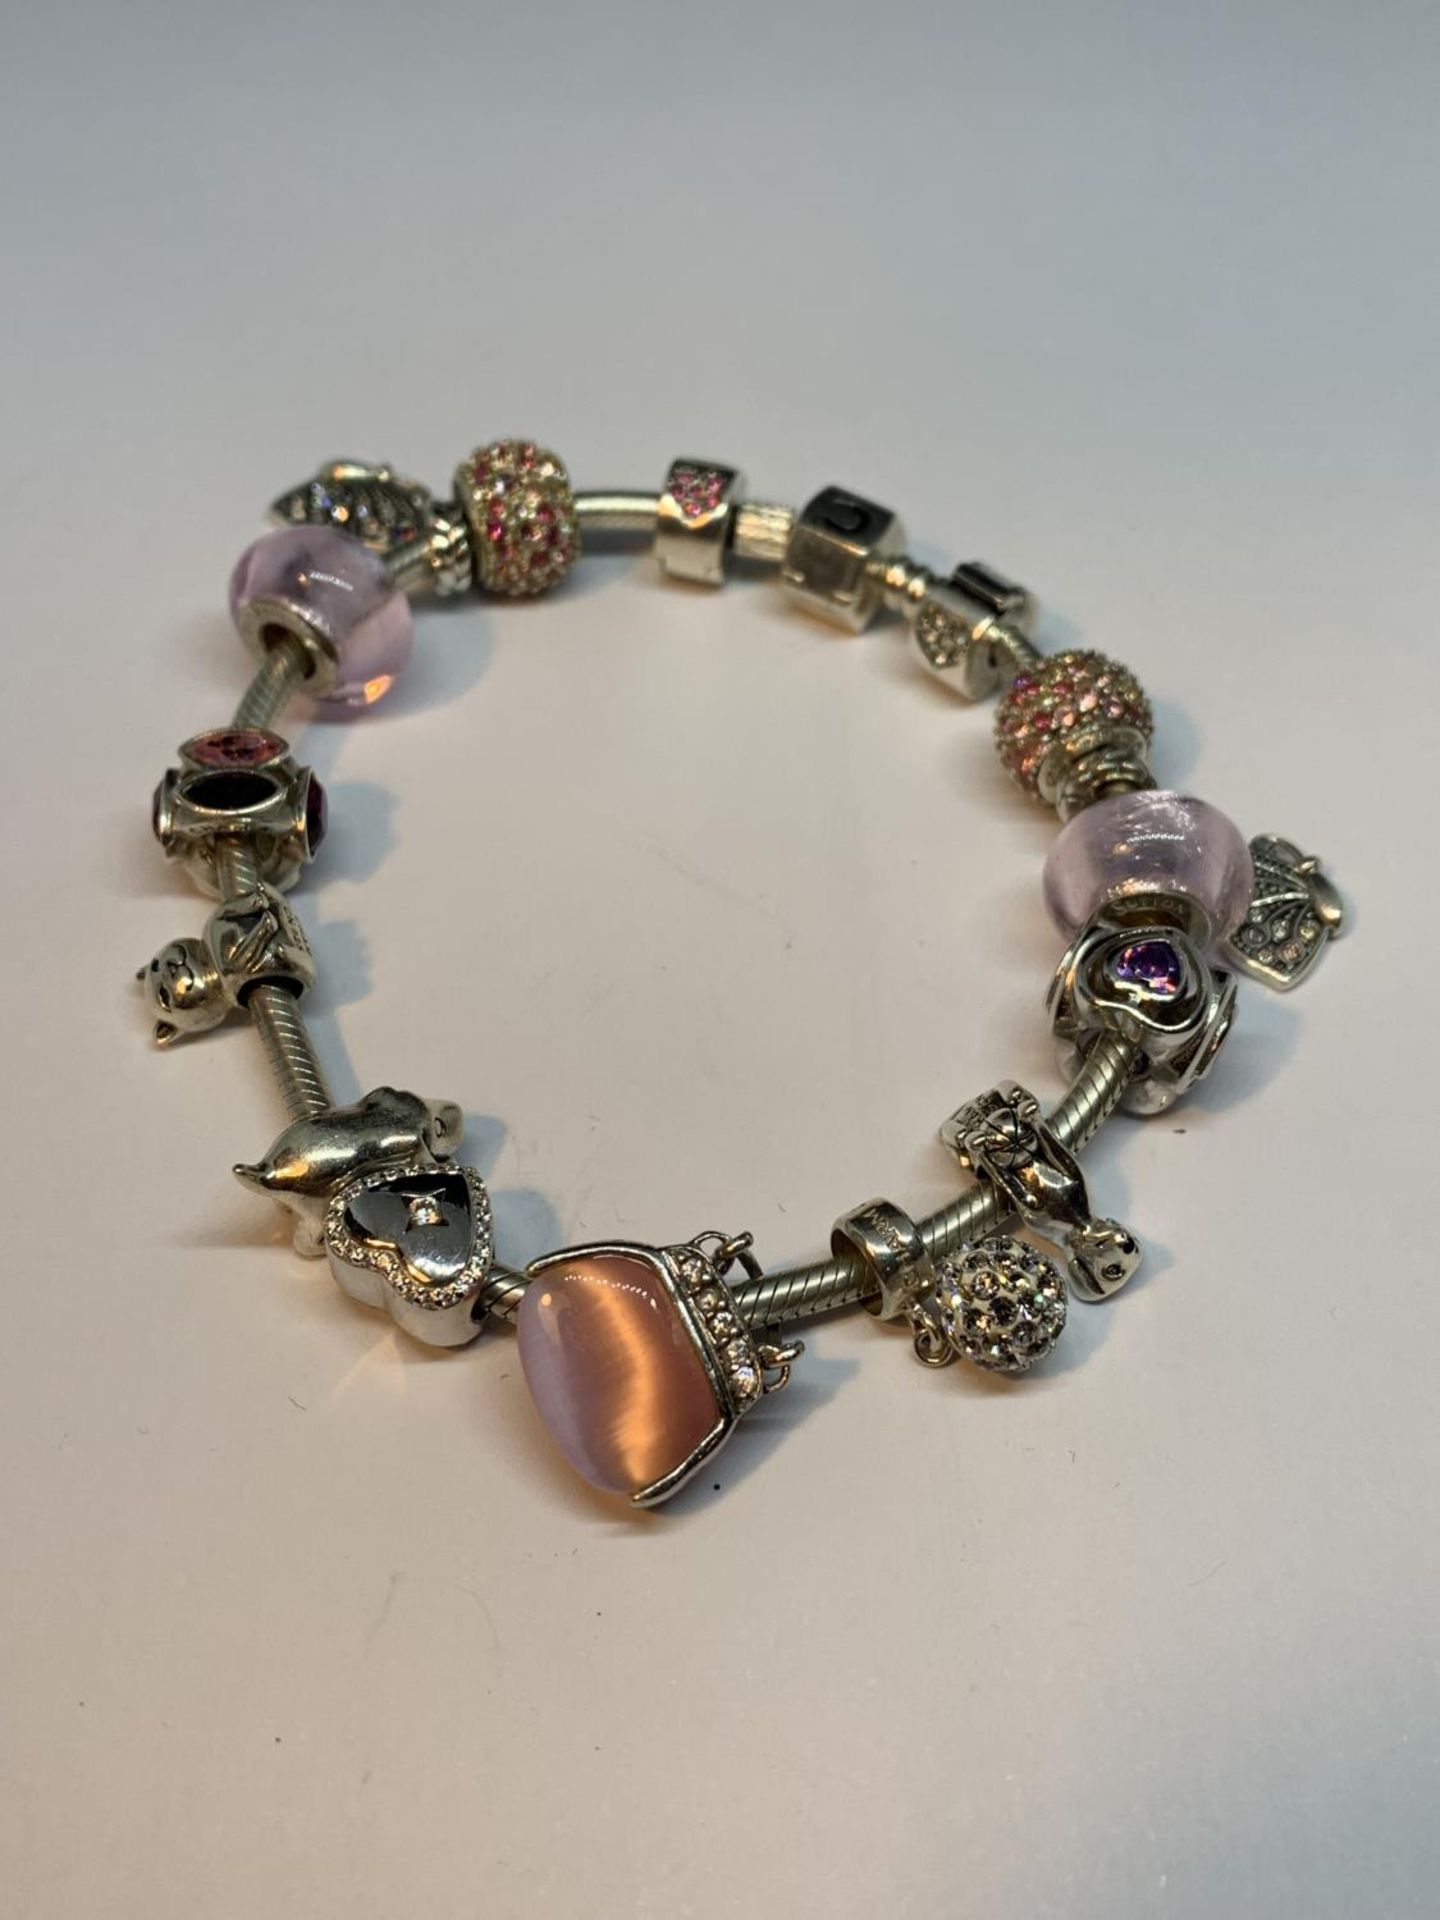 A CHAMILIA SILVER BRACELET WITH FOURTEEN CHARMS